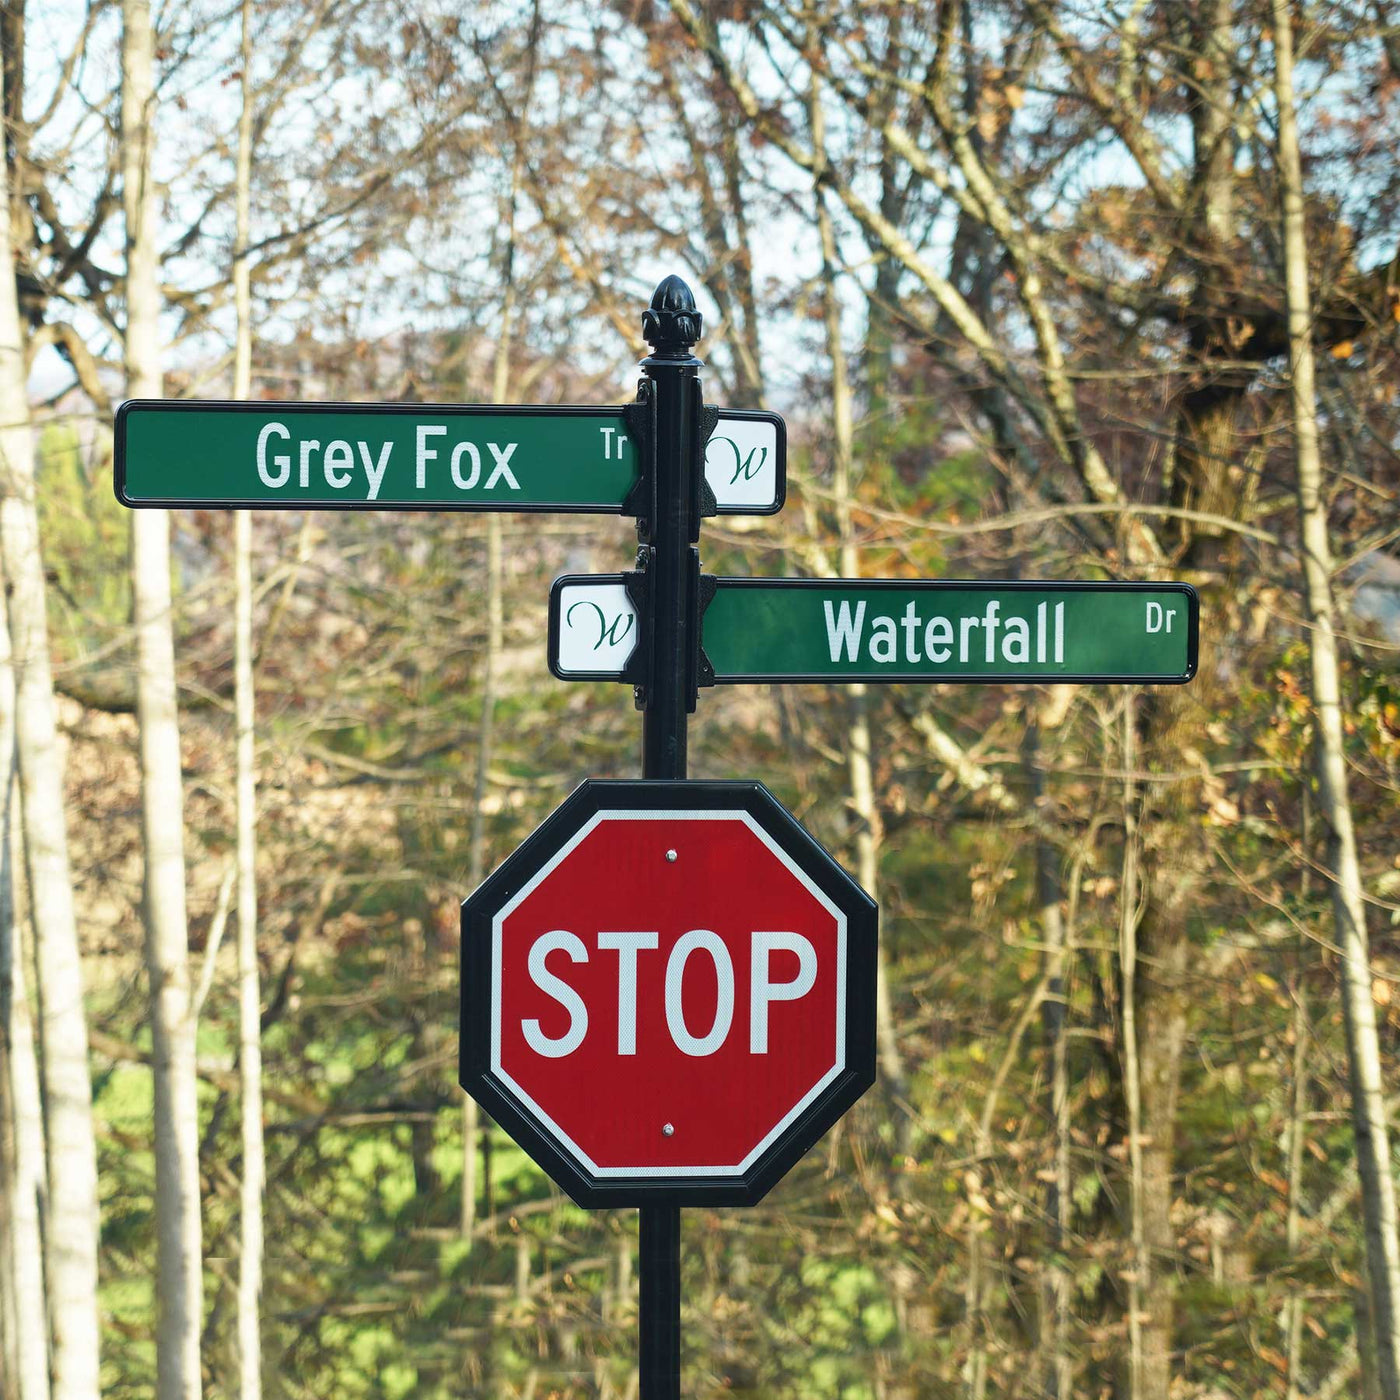 a street sign assembly including a printed street blade, a stop sign, a street paddle, street sign post, and decorative finial.